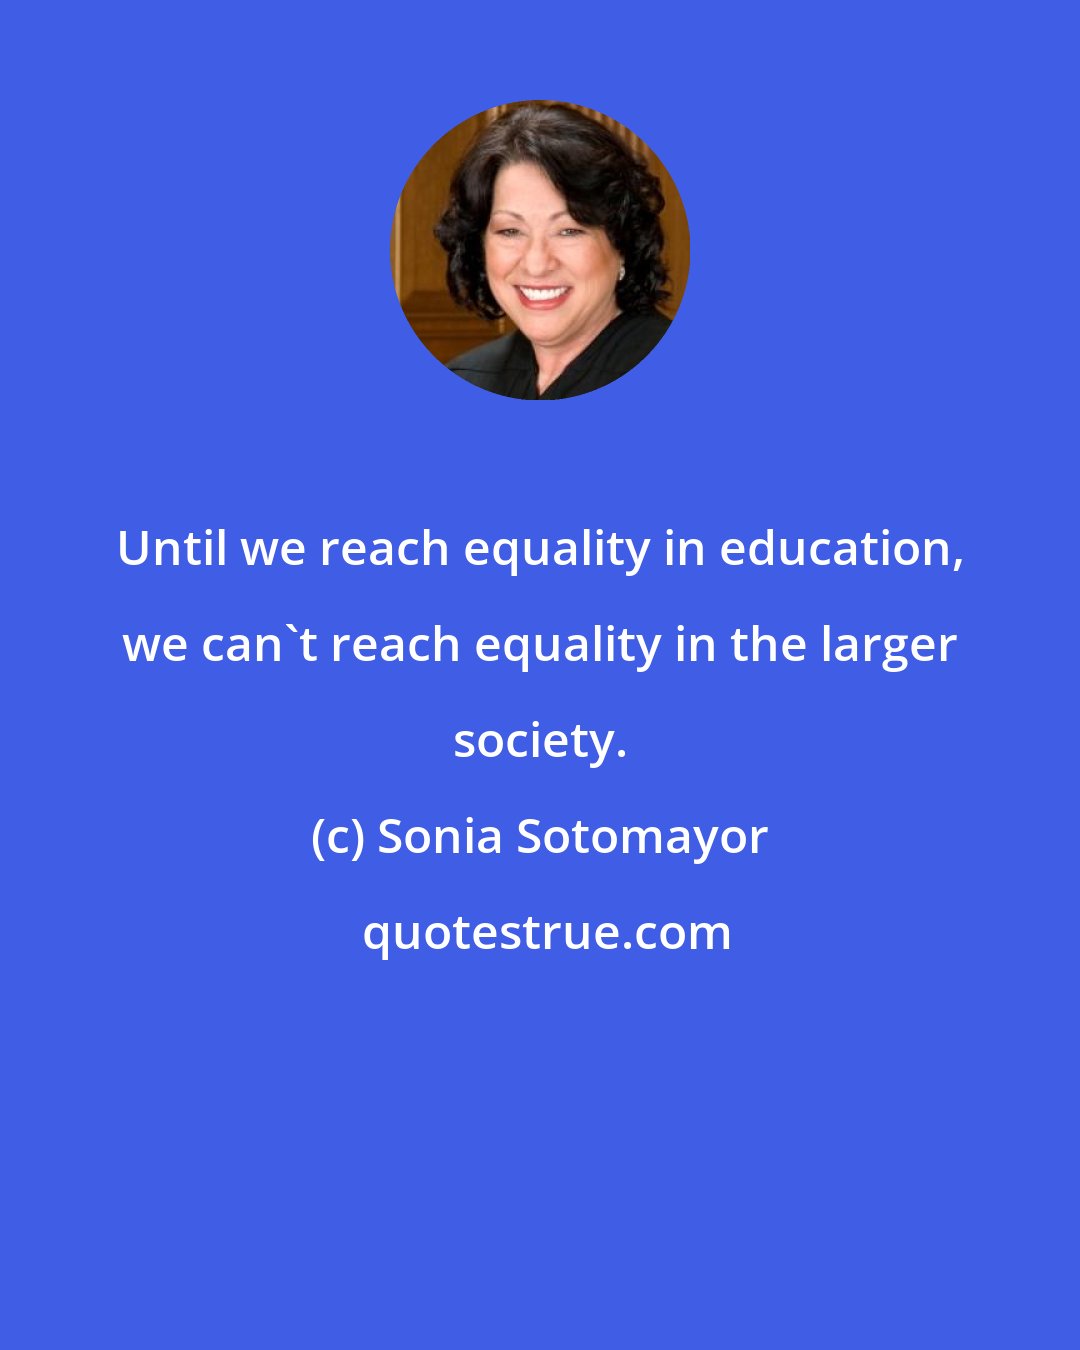 Sonia Sotomayor: Until we reach equality in education, we can't reach equality in the larger society.